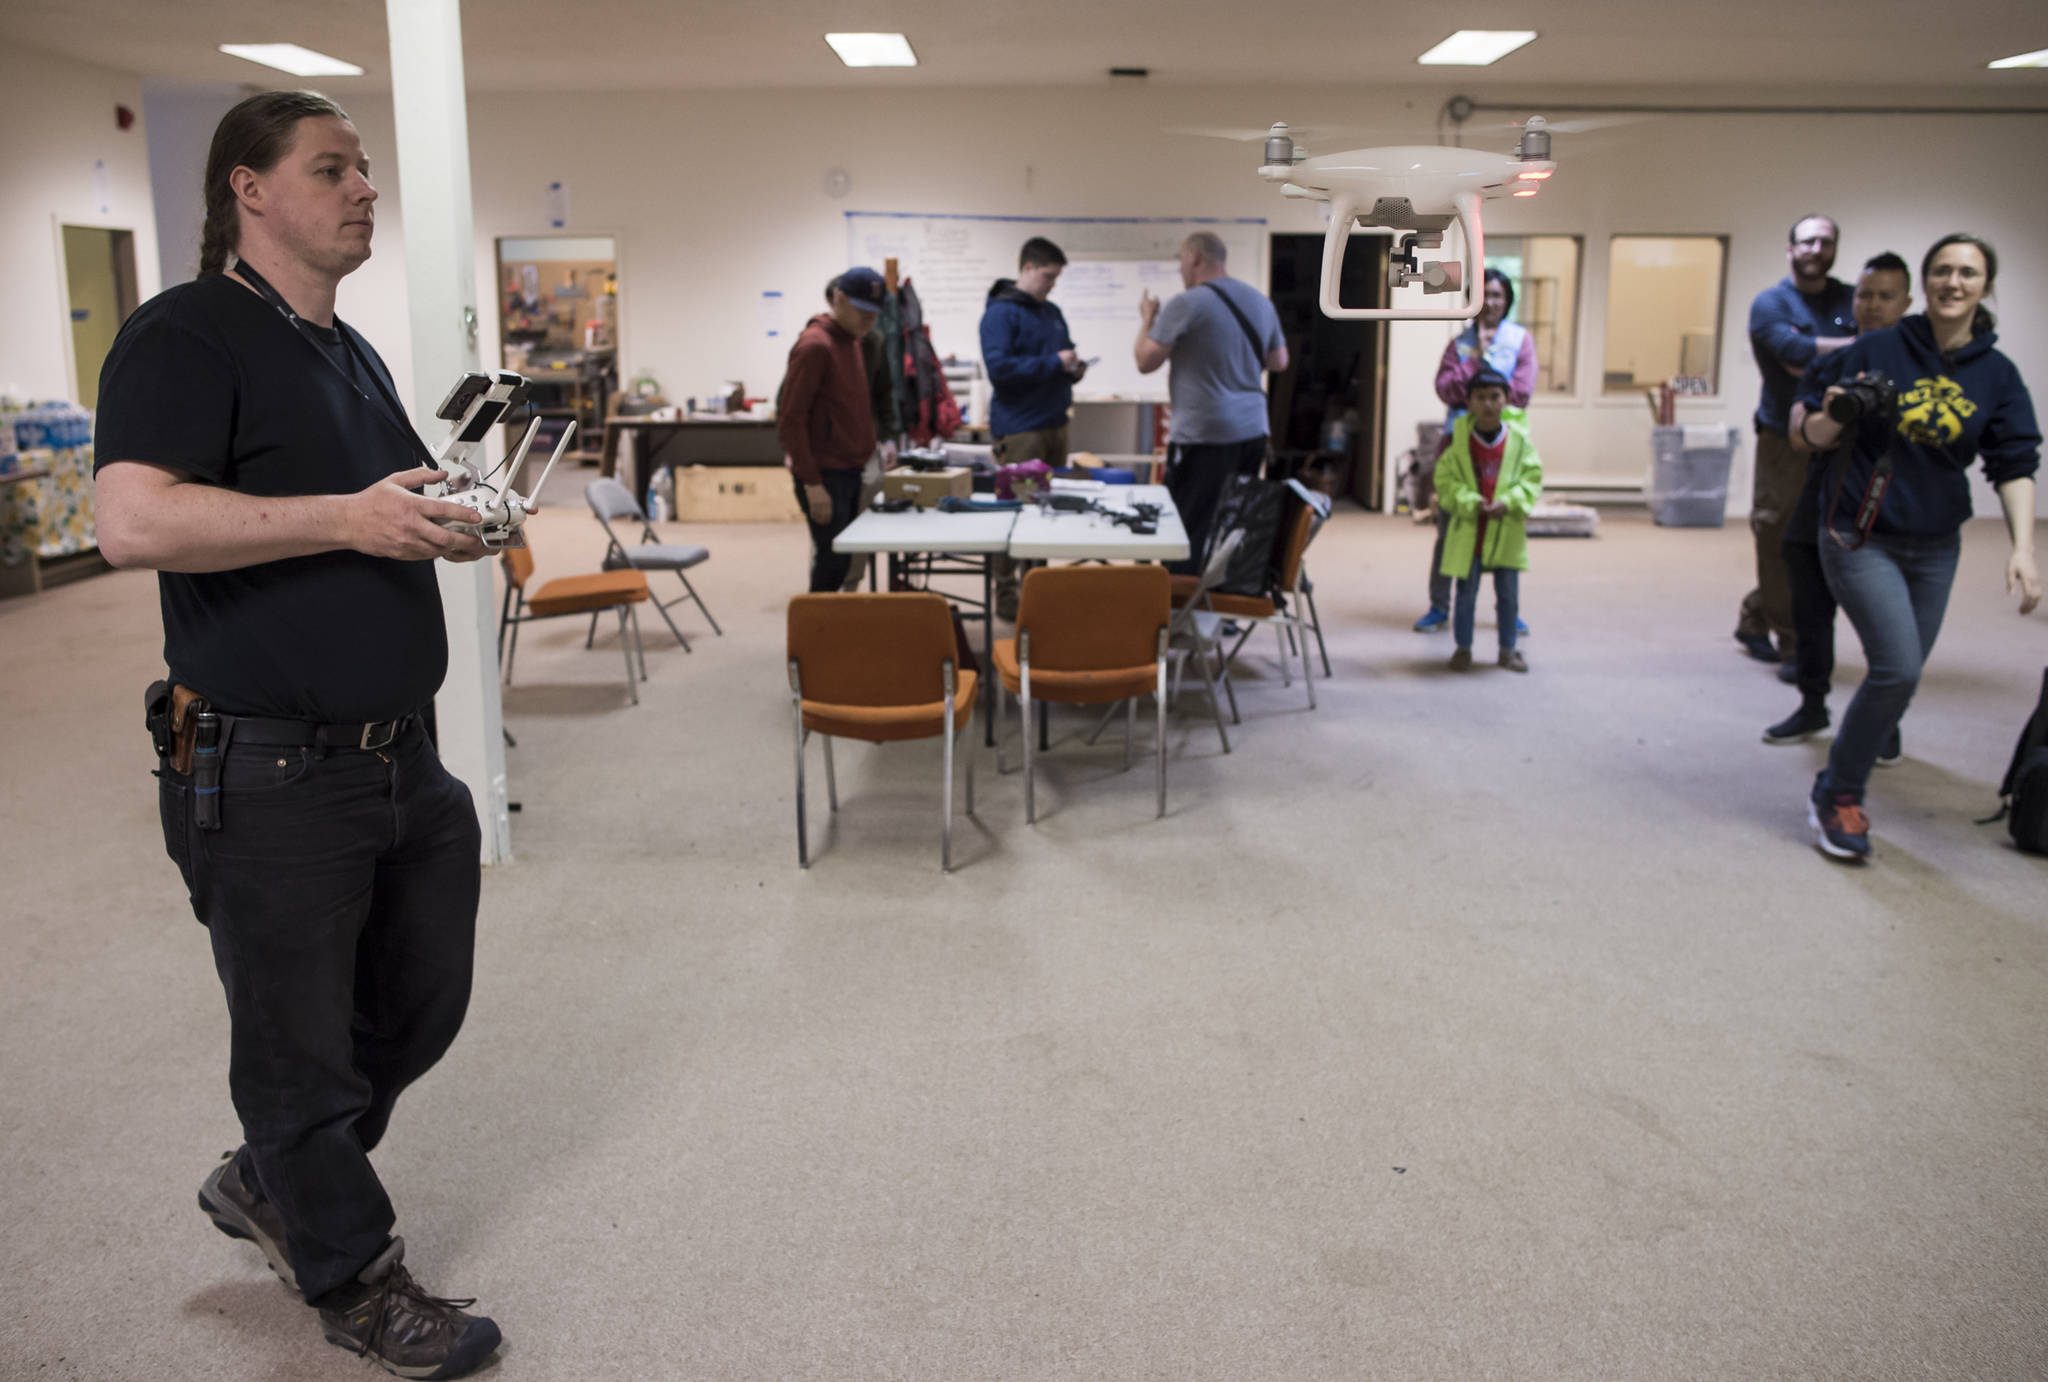 Mikko Wilson demonstrates his DJI Phantom 4 drone during a meetup at the Makers Space in Douglas on Thursday, June 28, 2018. (Michael Penn | Juneau Empire)